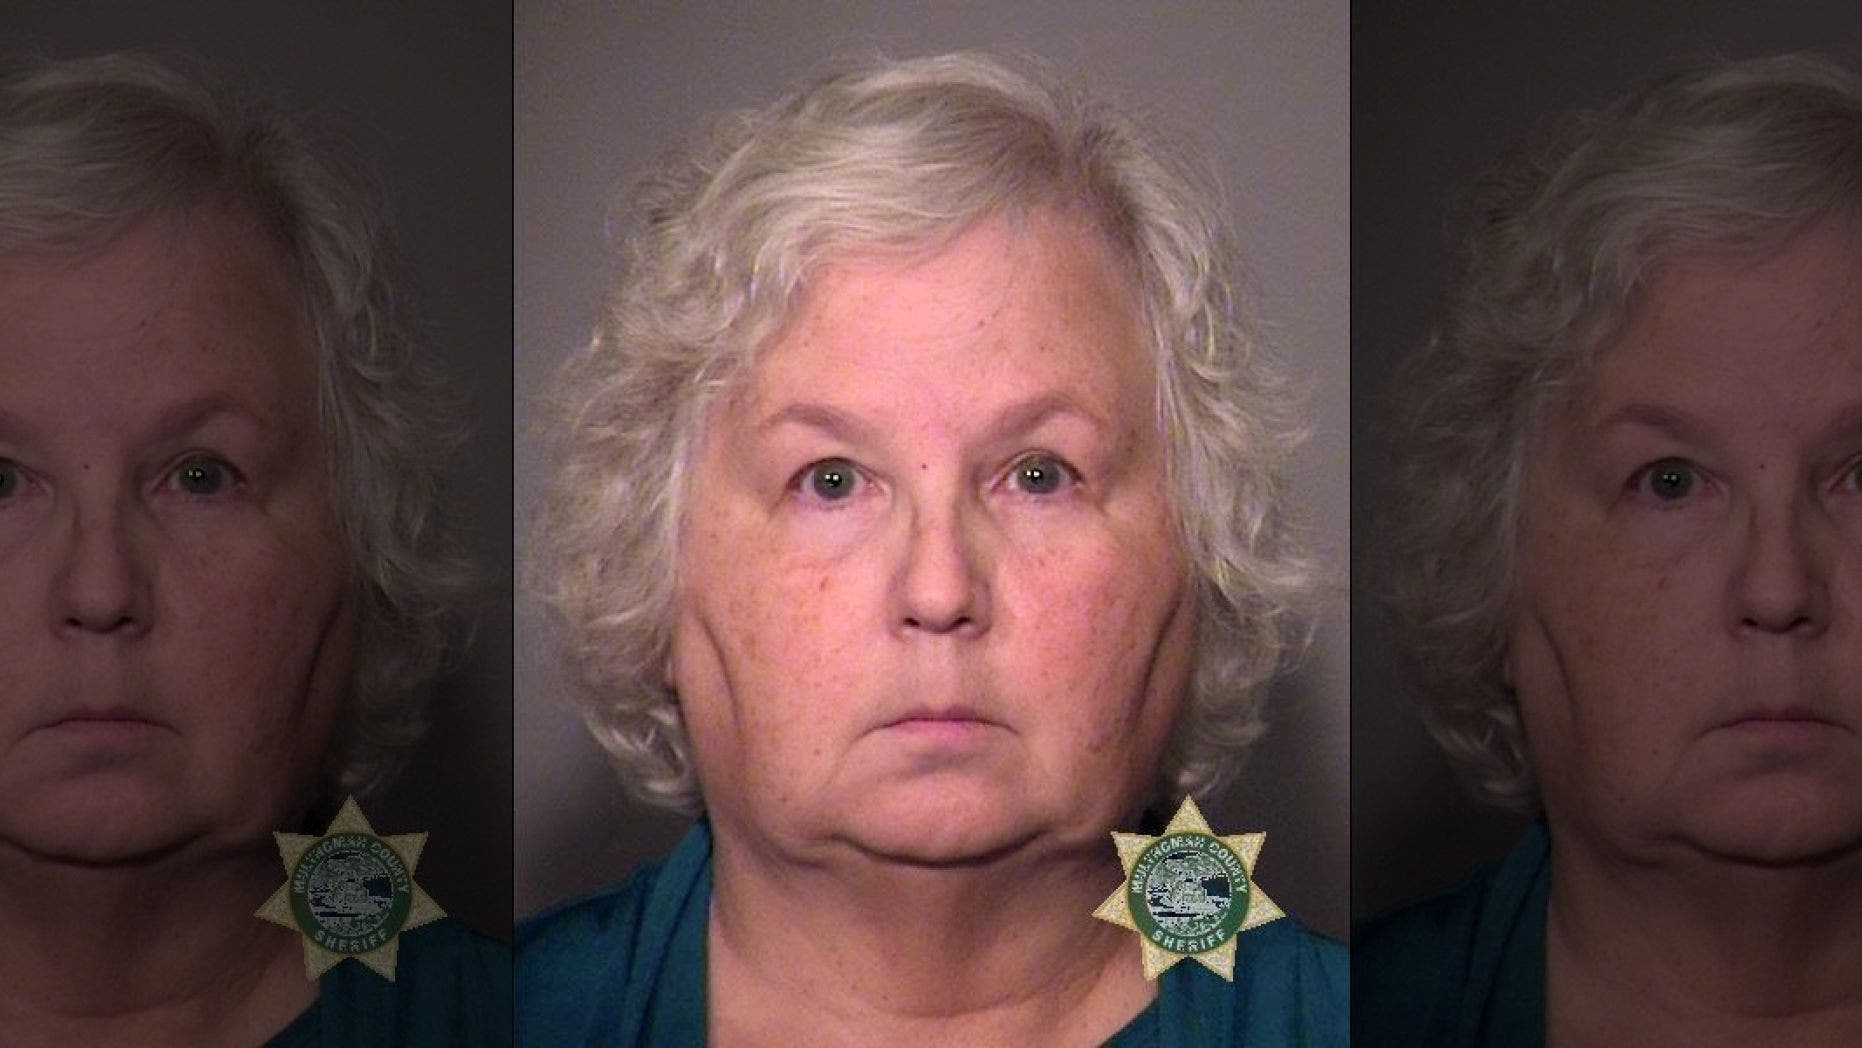 ‘How to Murder Your Husband’ author Nancy Crampton Brophy found guilty in real-life Oregon murder – World news